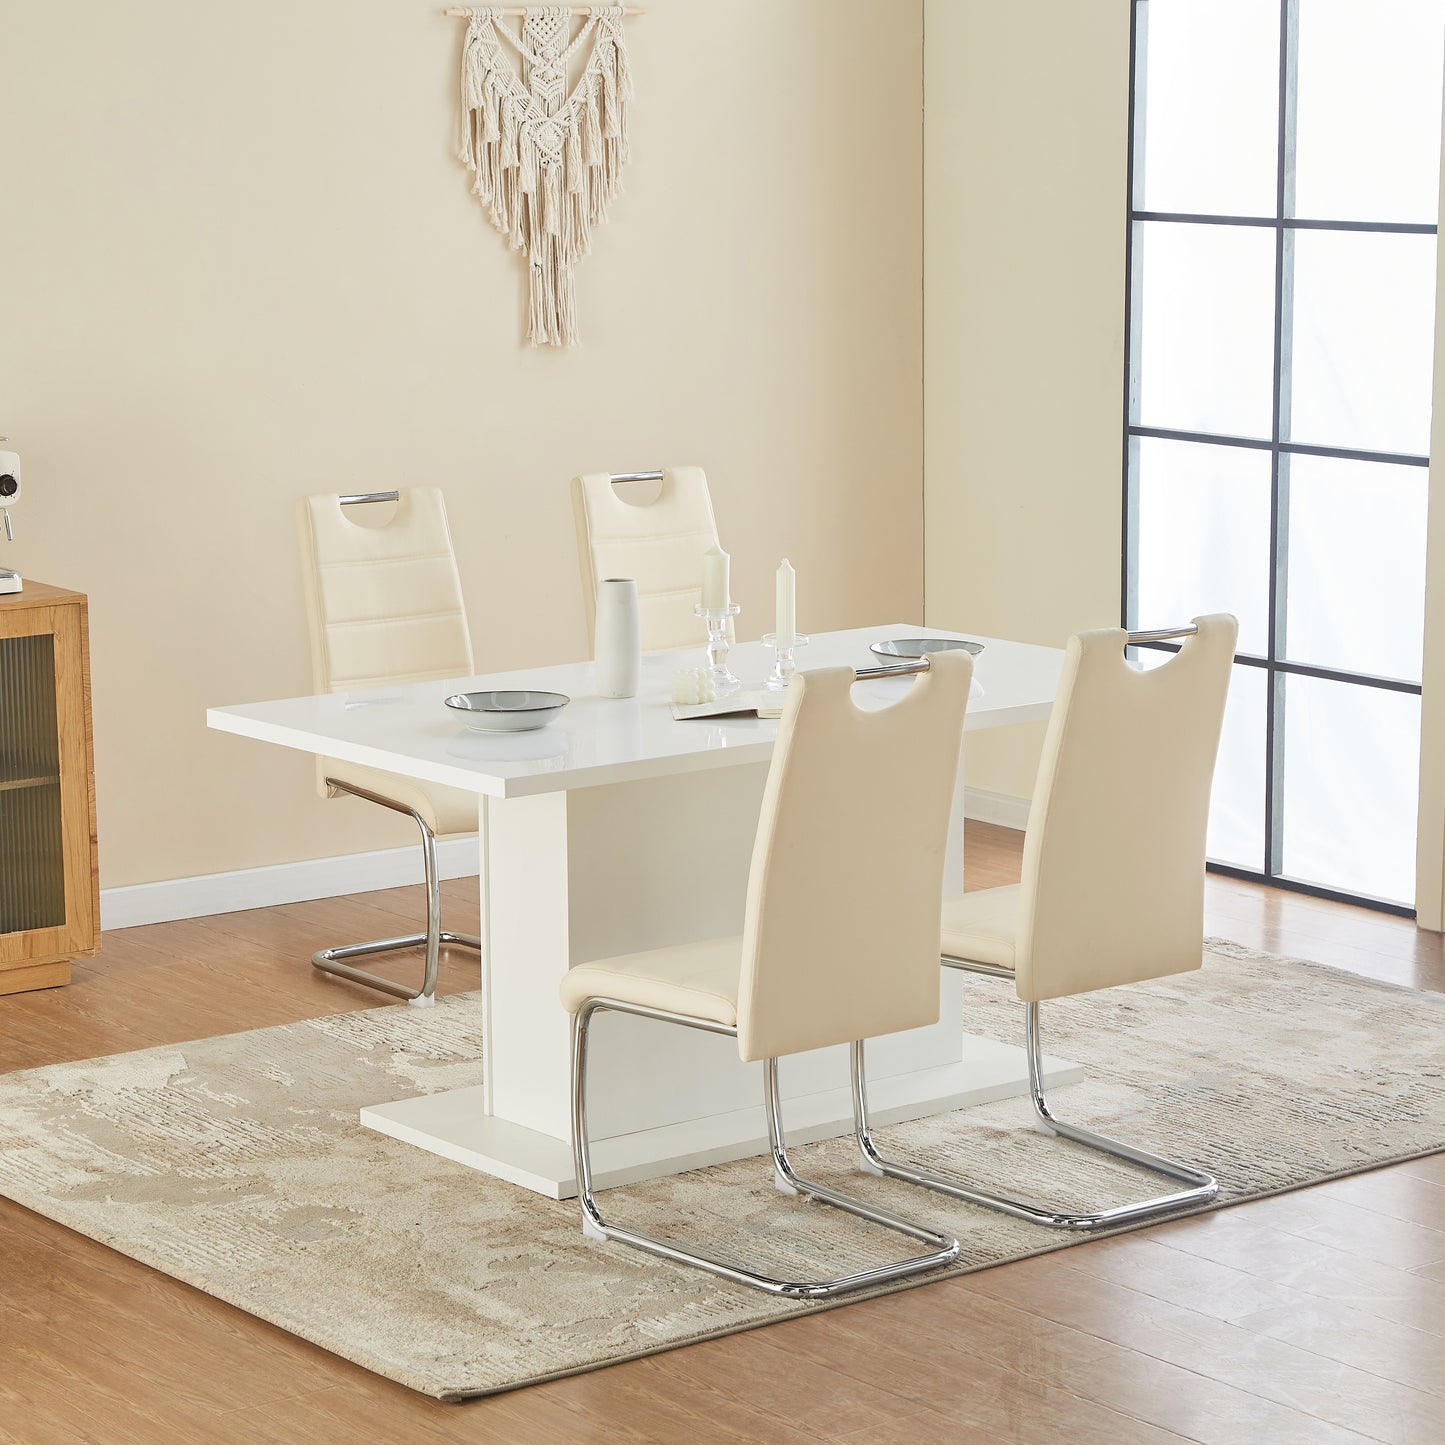 ANN-HANDLE Upholstered Dining Chair with Arched Iron Legs - Beige